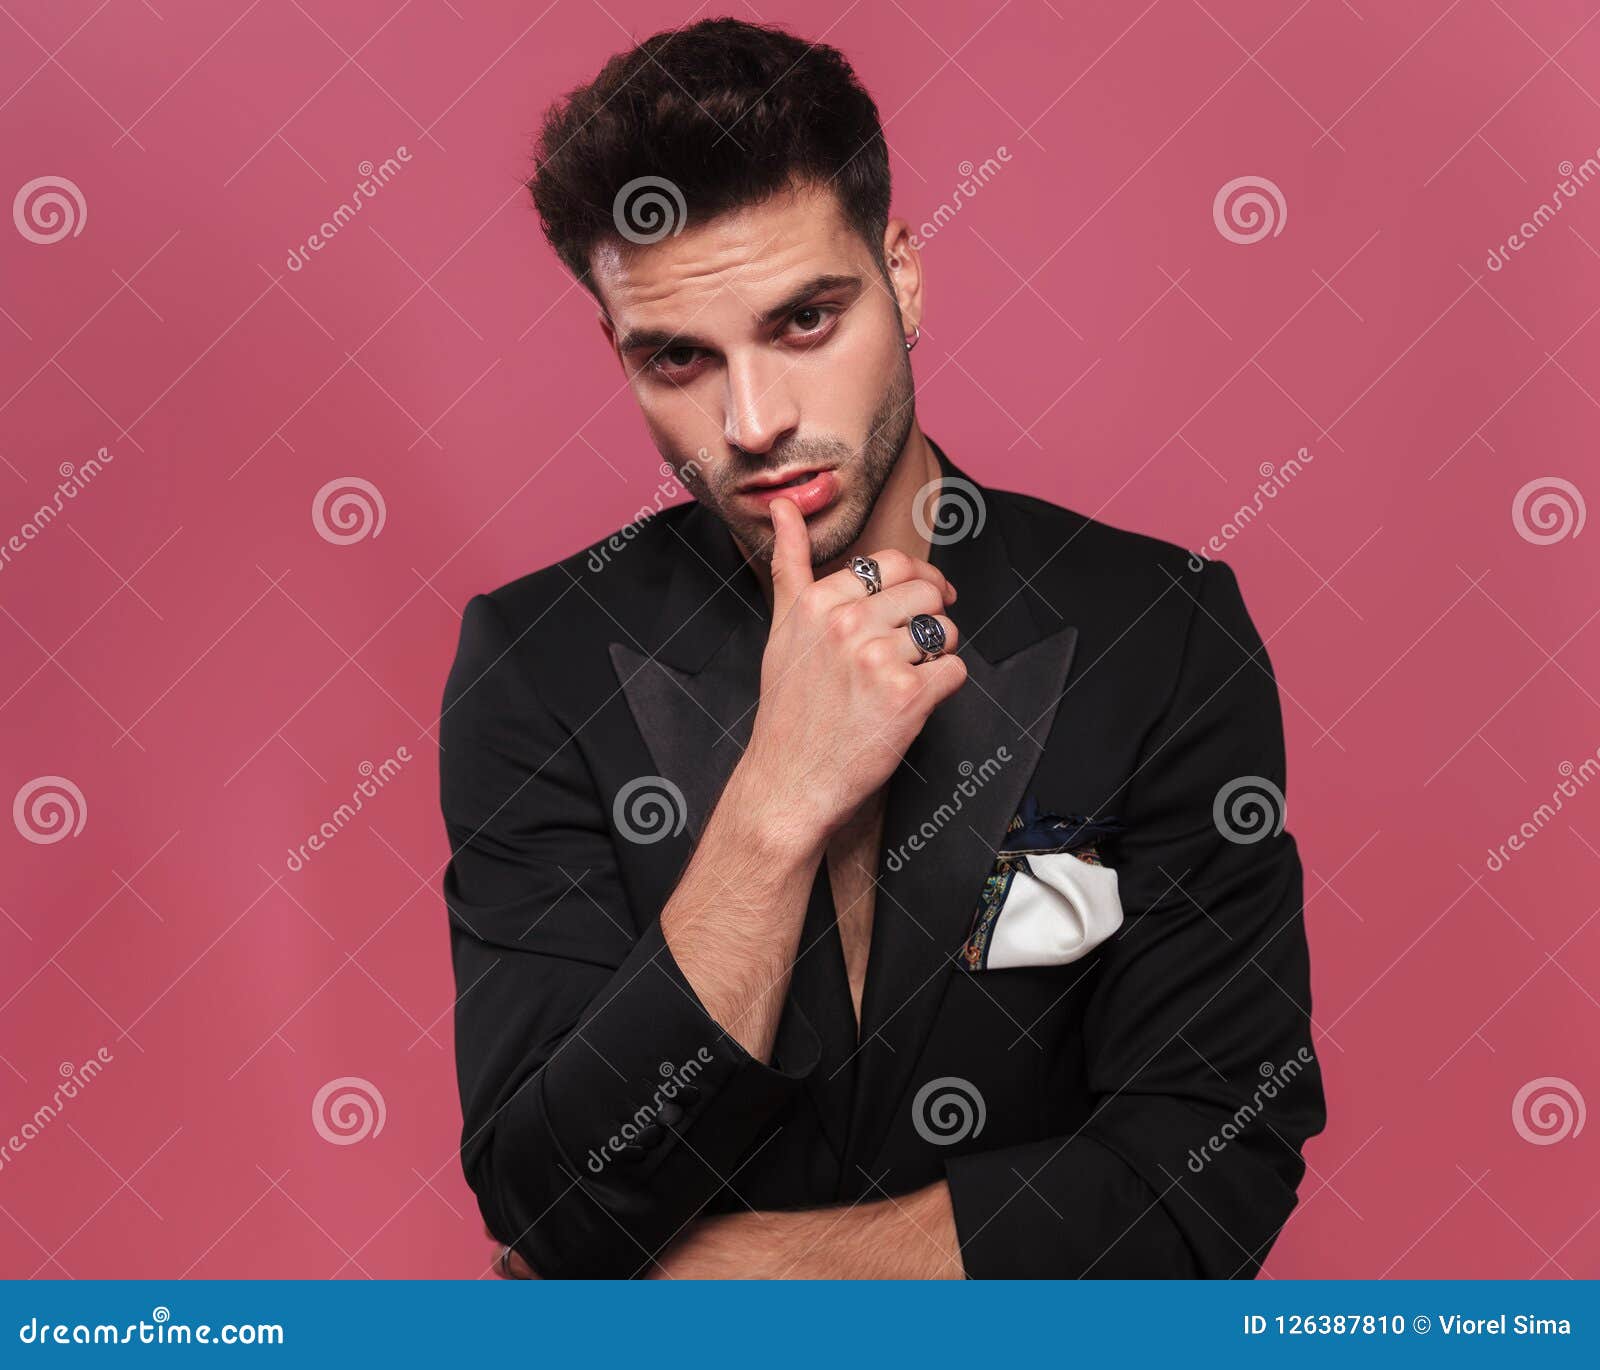 Male Hands Touching Female Bust Stock Photo By 83375750, 44% OFF